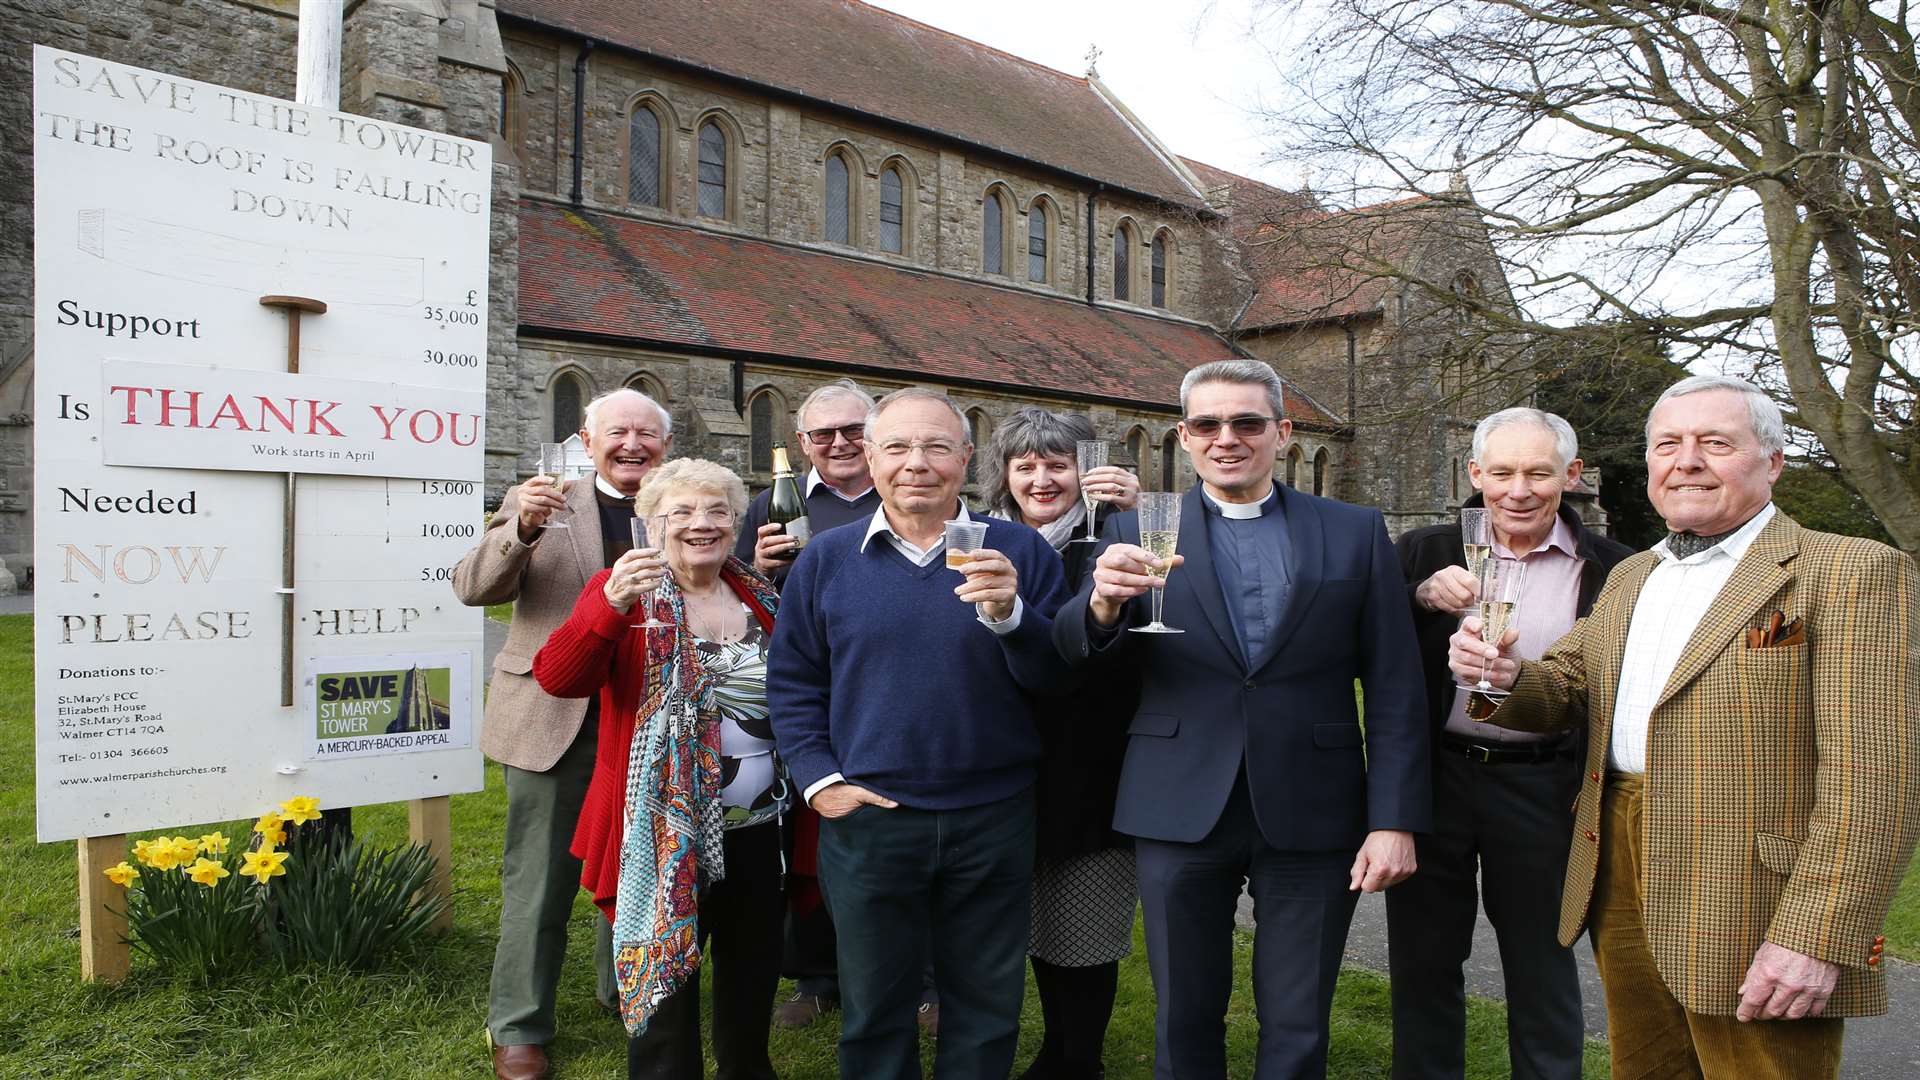 Members of the Tower Appeal Committee at Walmer celebrating reaching their £35,000 target to replace the tower roof at St Mary's Church.